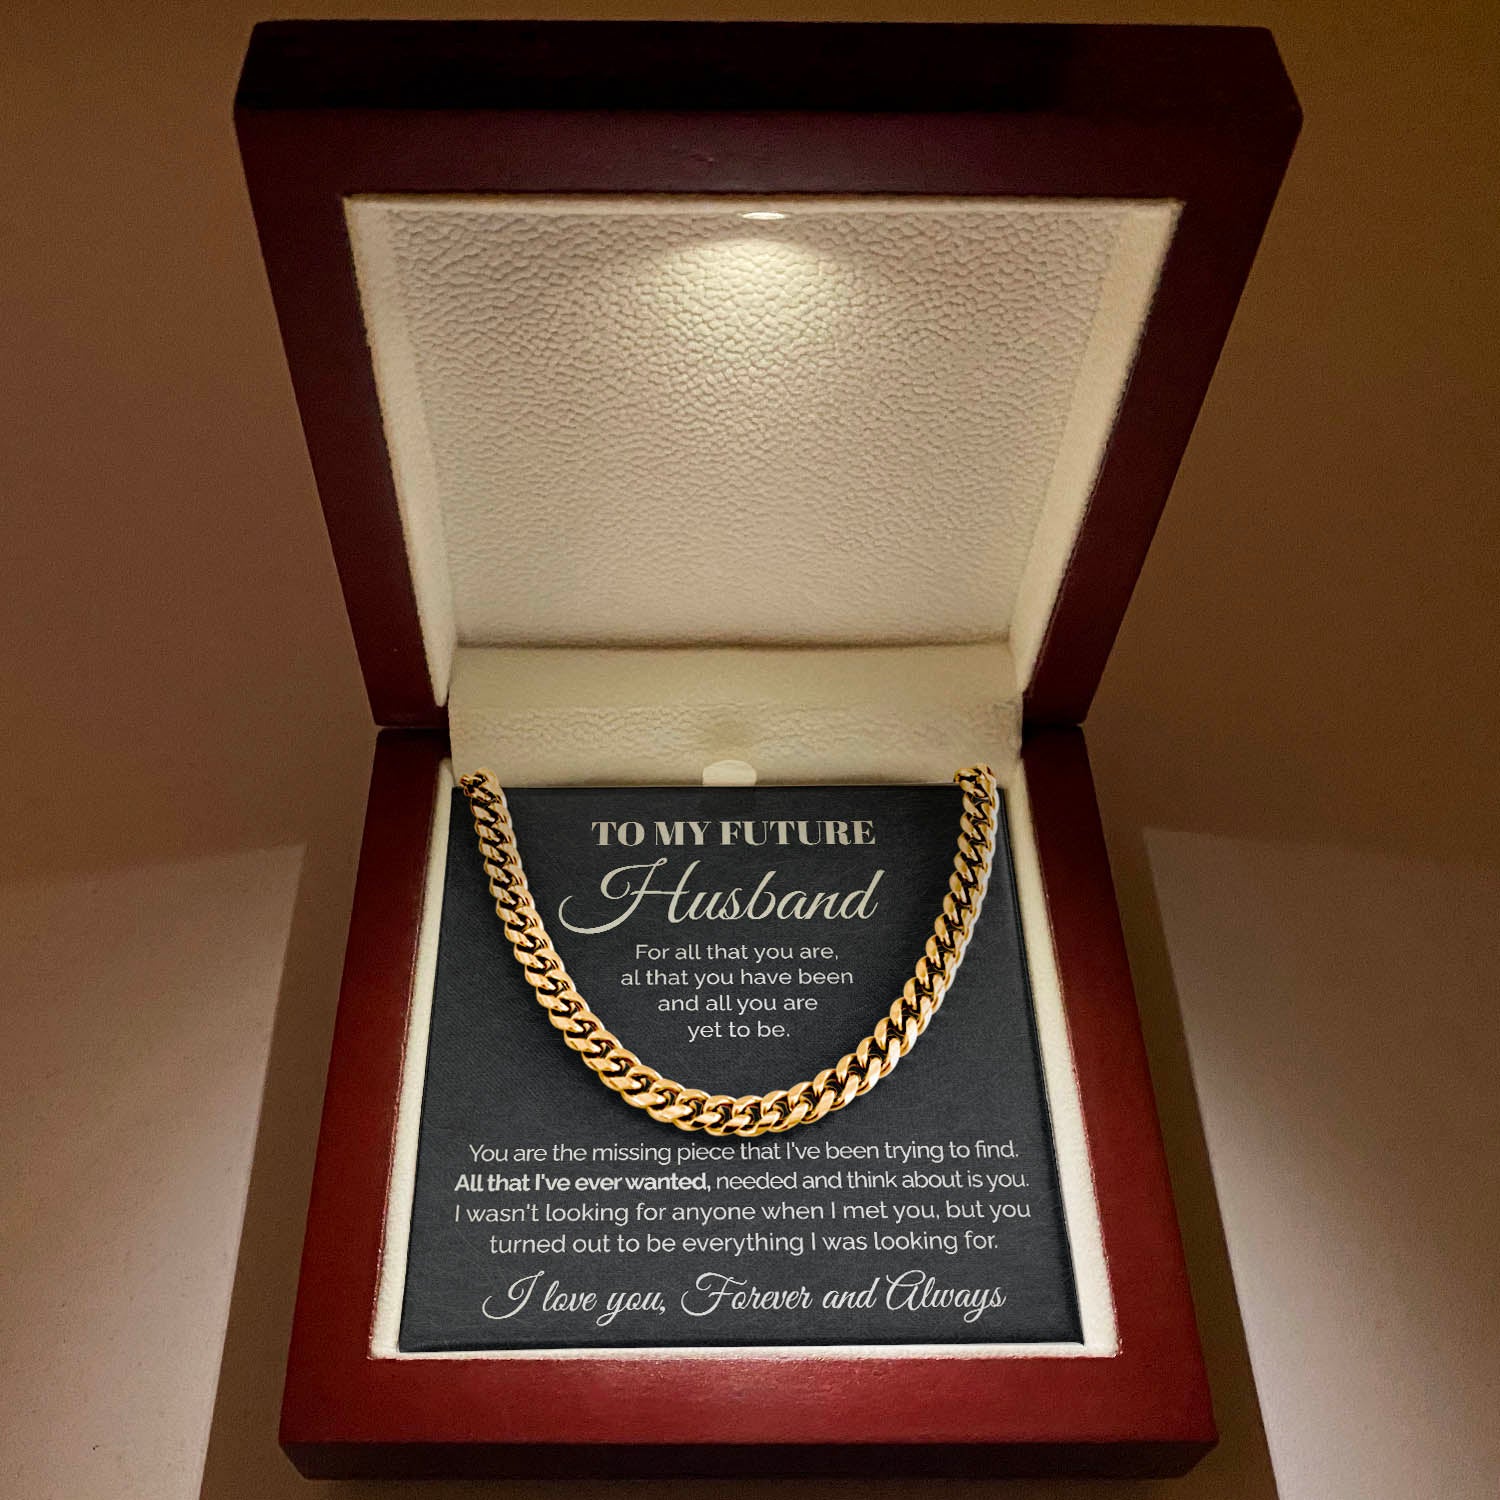 ShineOn Fulfillment Jewelry 14K Yellow Gold Finish / Luxury Box To my Future Husband - You are the missing piece - Cuban Link Chain